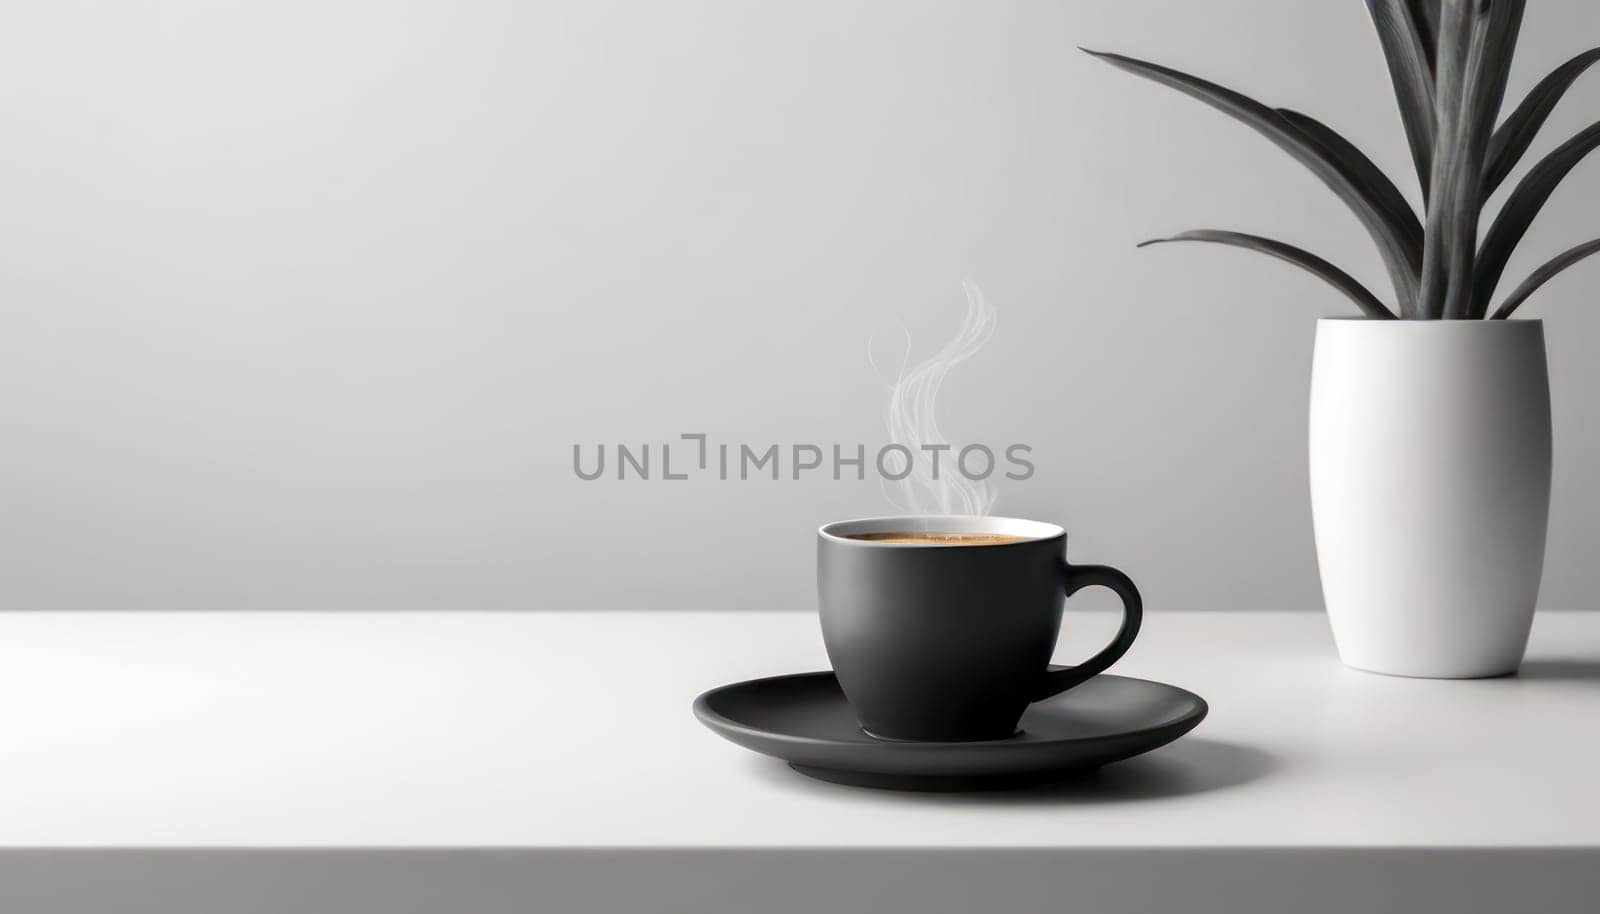 Morning Coffee: Cup filled with steaming coffee rests on a clean white table, casting a subtle shadow. creating a serene morning scene